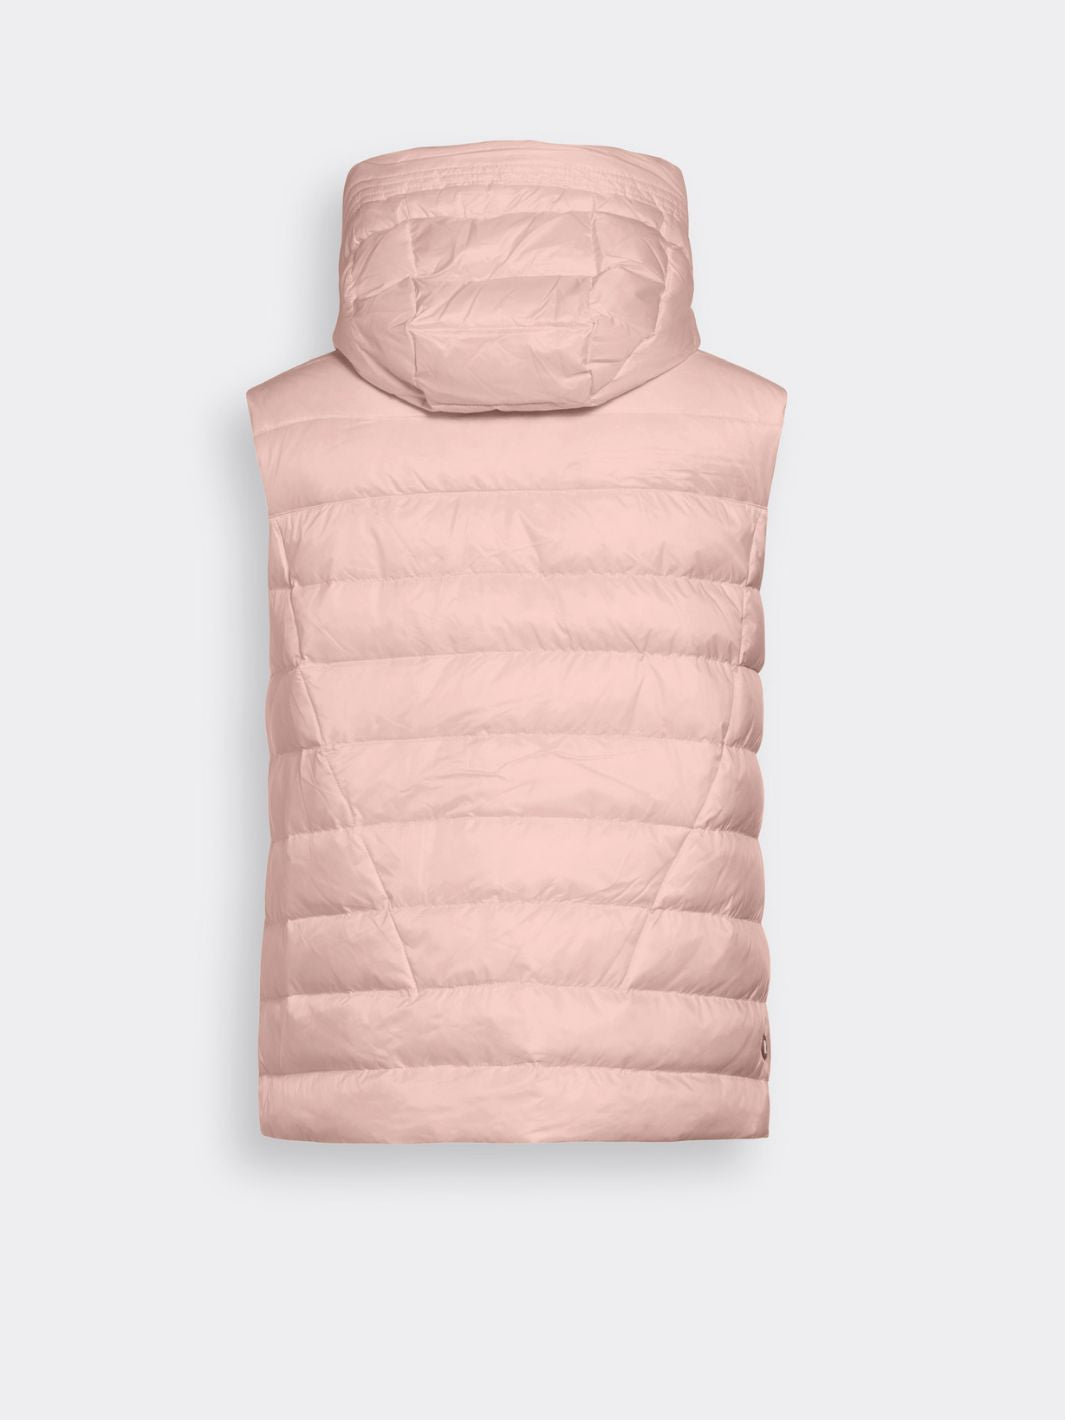 DIFFUSION.ie Reset Bordeaux Hooded Gilet in Macaron Pink